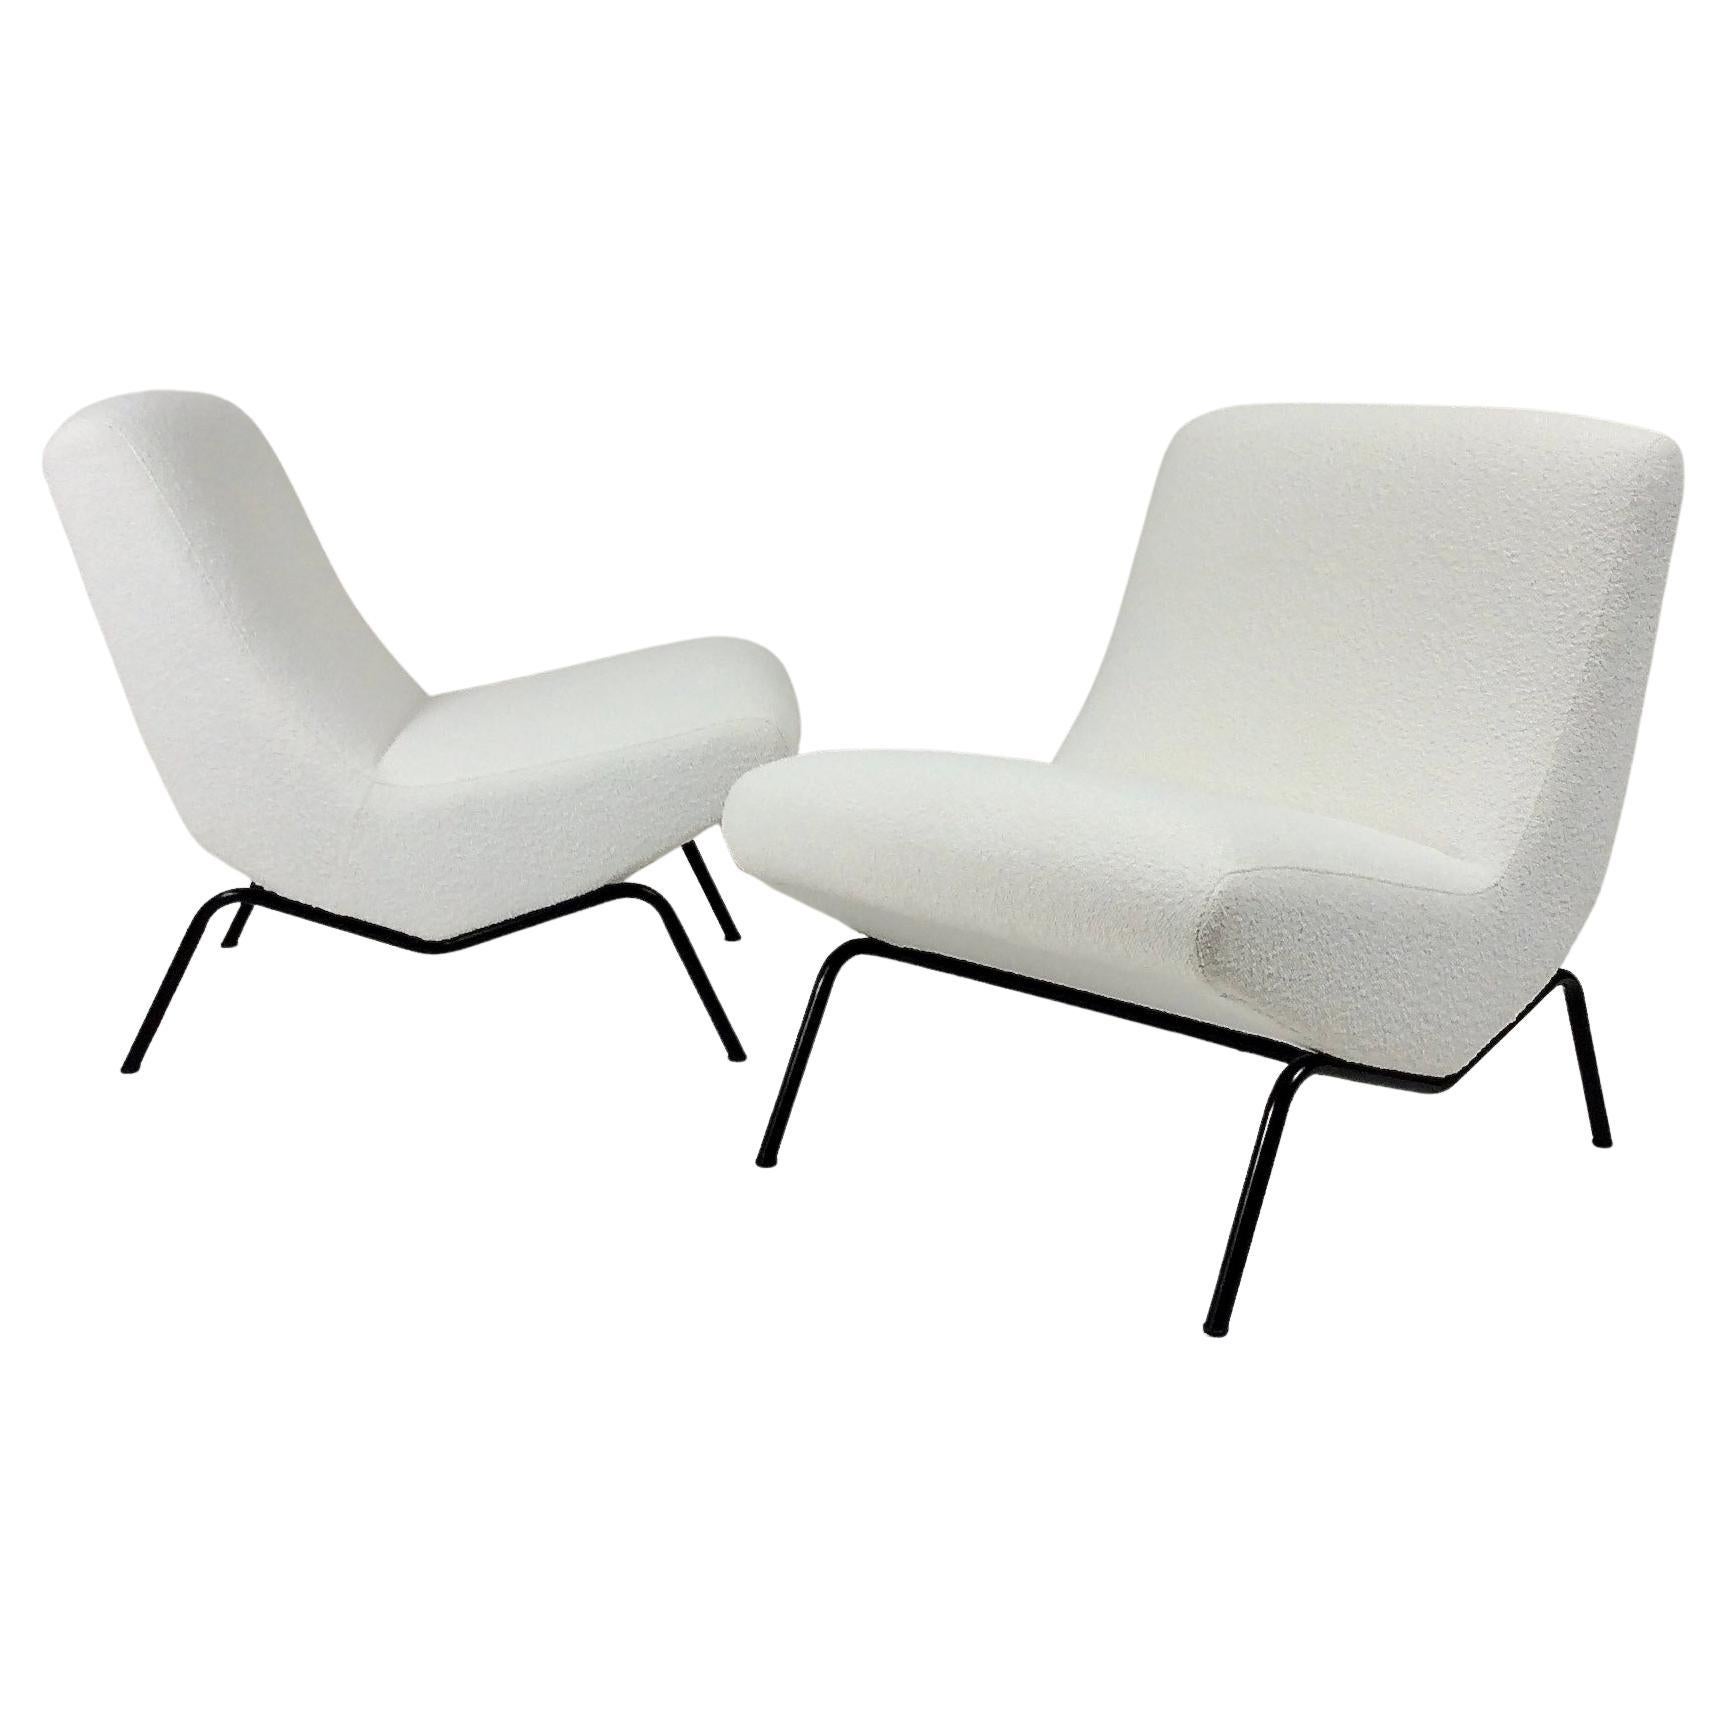 Pierre Paulin Pair of Lounge Chairs, CM194 Model for Thonet, circa 1957, France